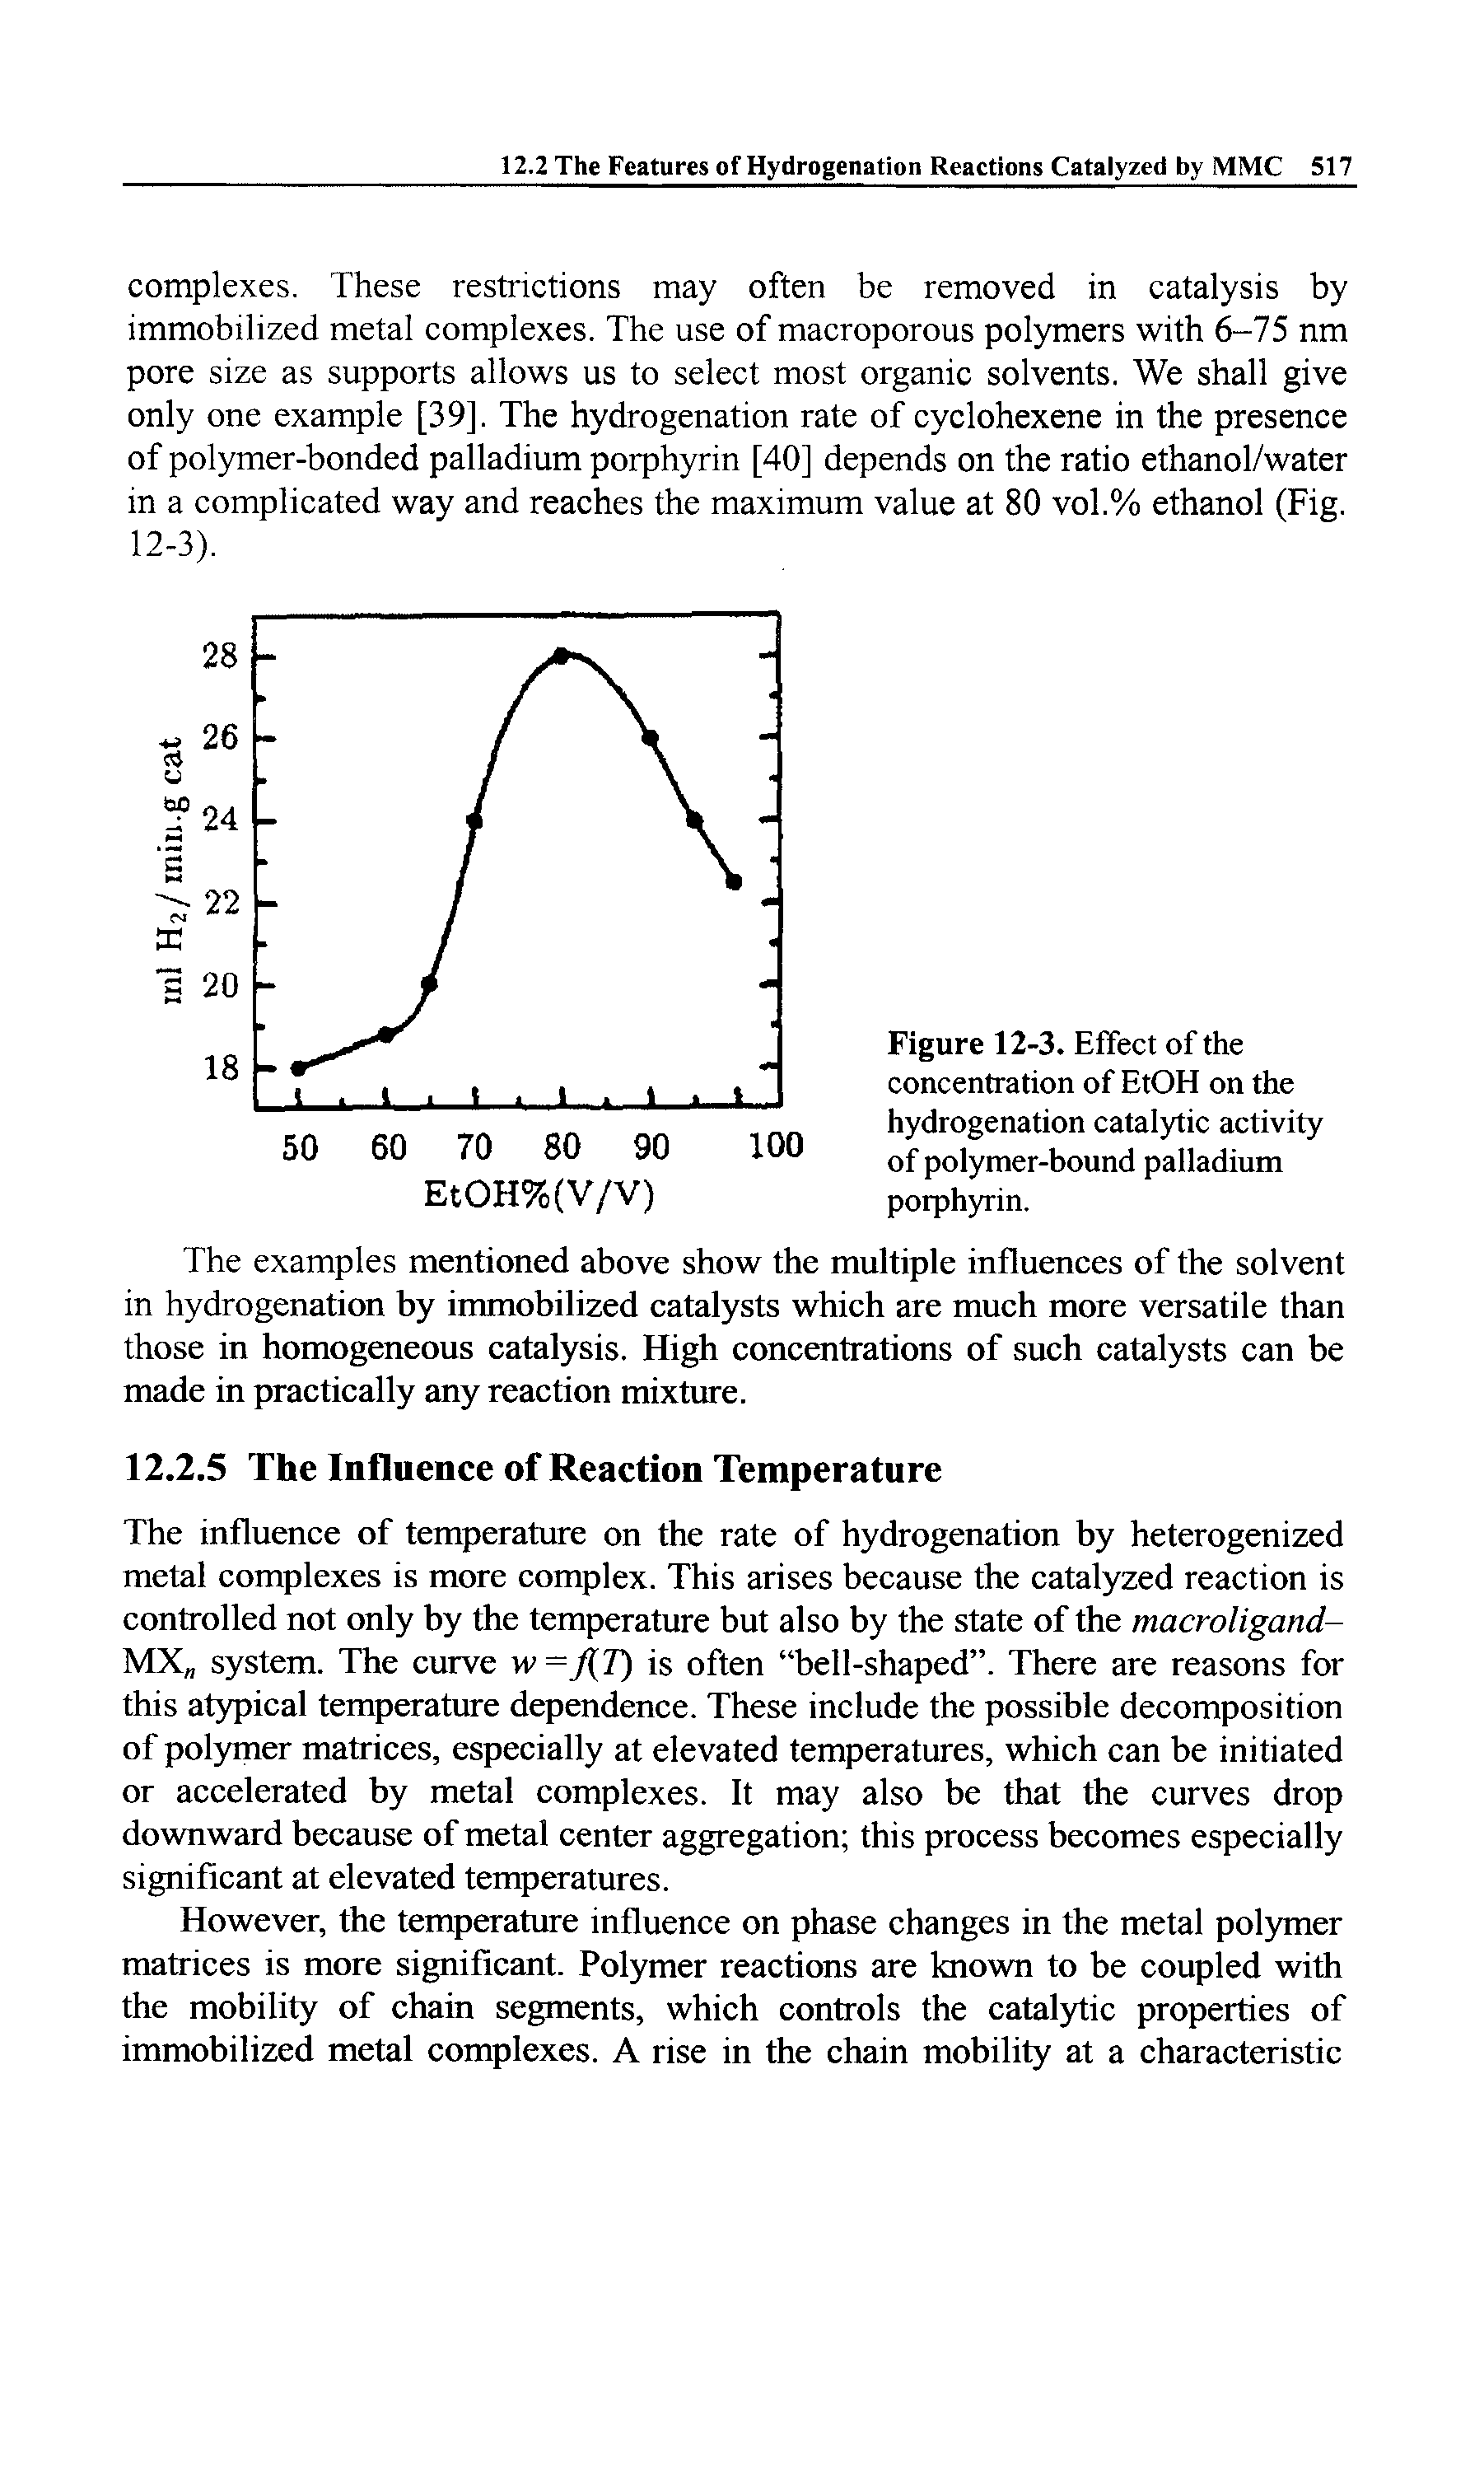 Figure 12-3. Effect of the concentration of EtOH on the hydrogenation catalytic activity of polymer-bound palladium porphyrin.